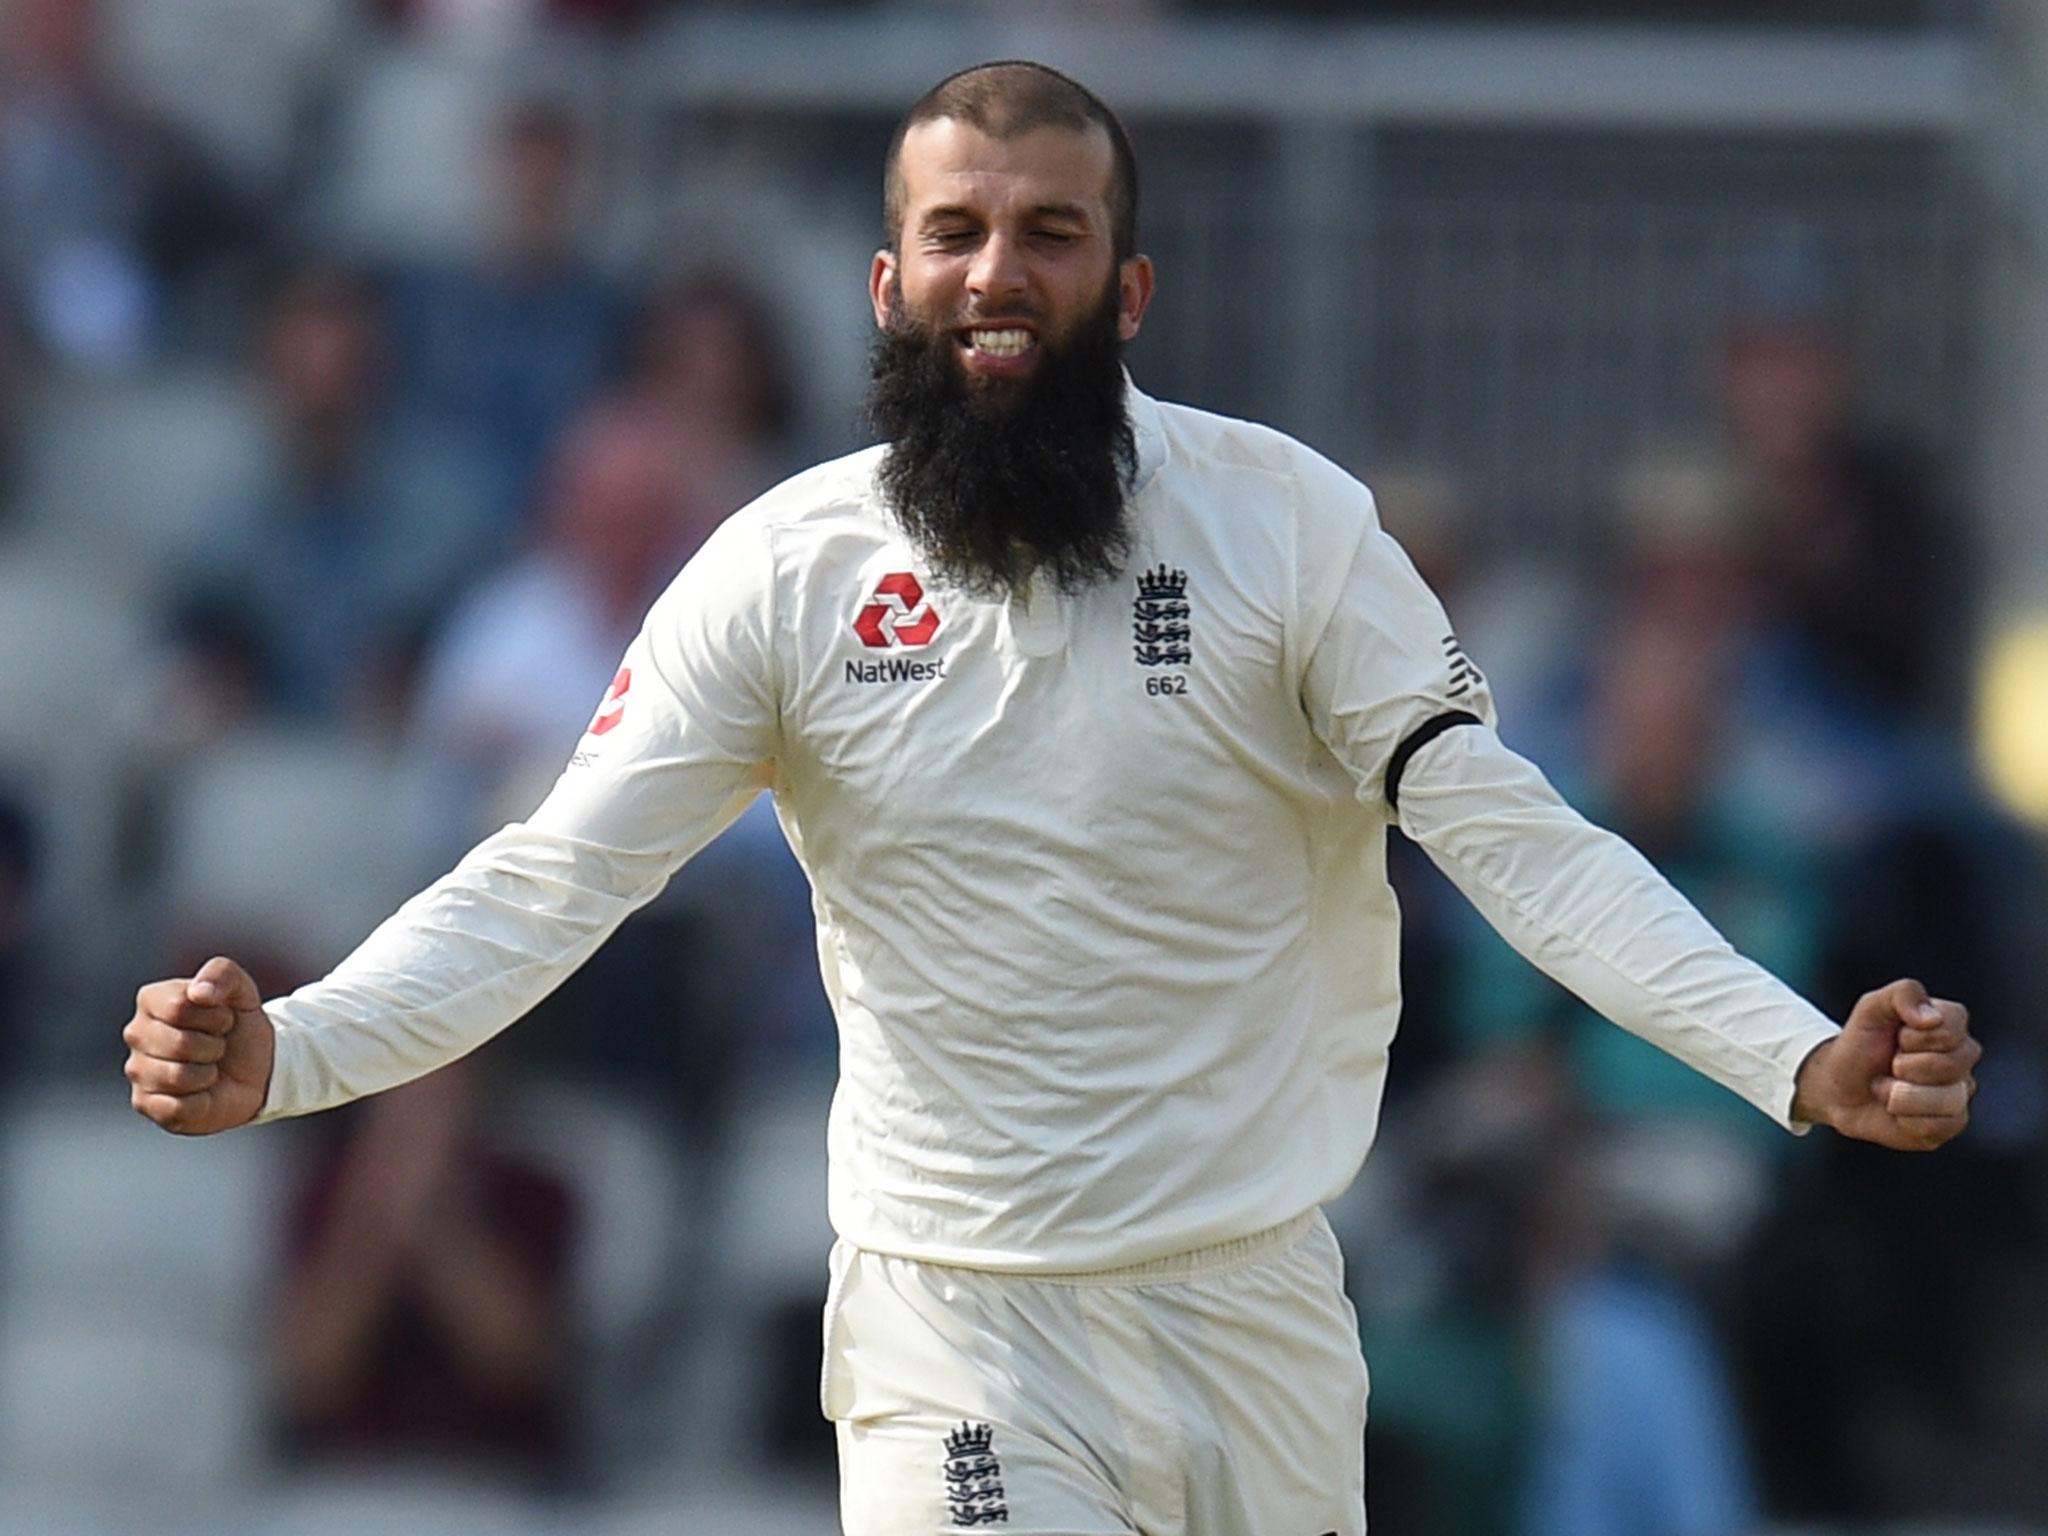 Moeen Ali celebrates after taking the final wicket to secure England's fourth Test victory over South Africa